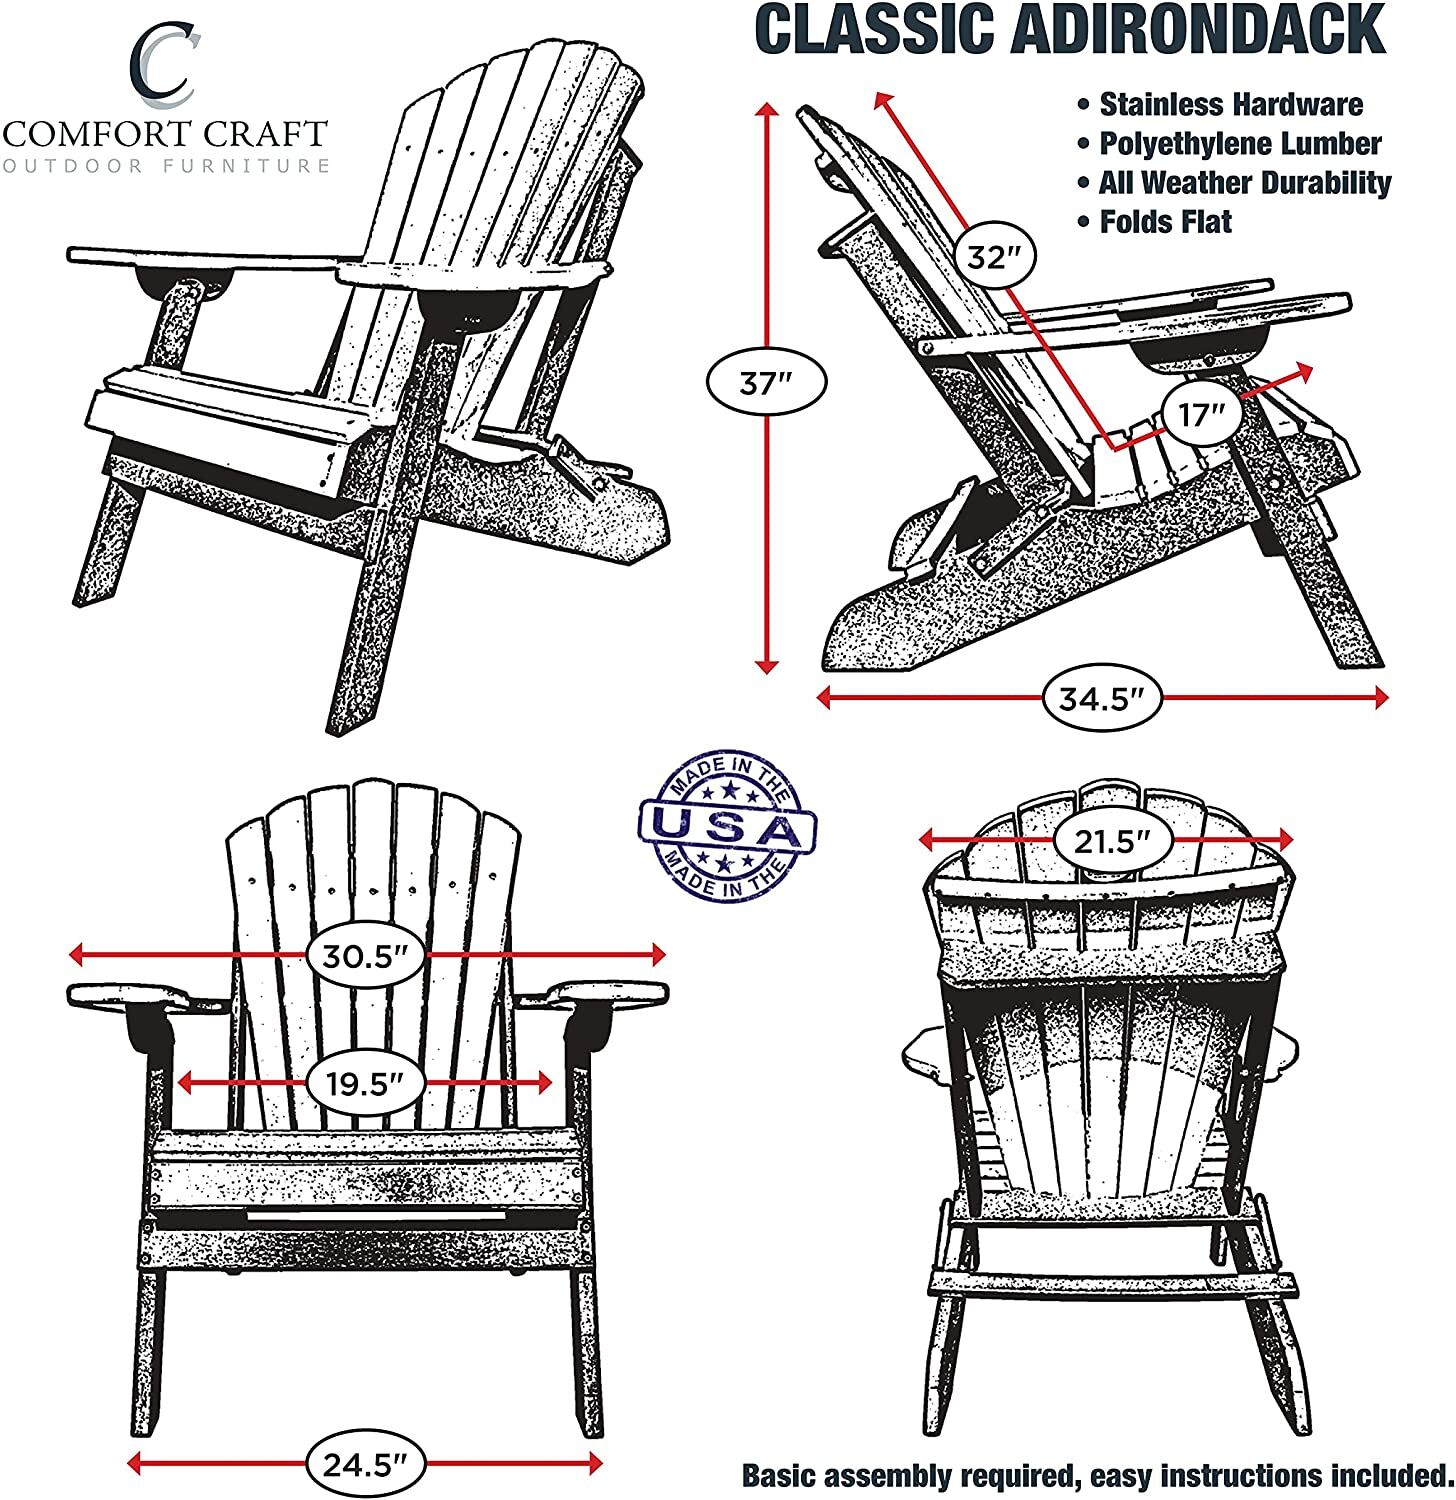 Dimensions for the Classic Adirondack ChairDimensions for the Classic Adirondack Polylumber Chair